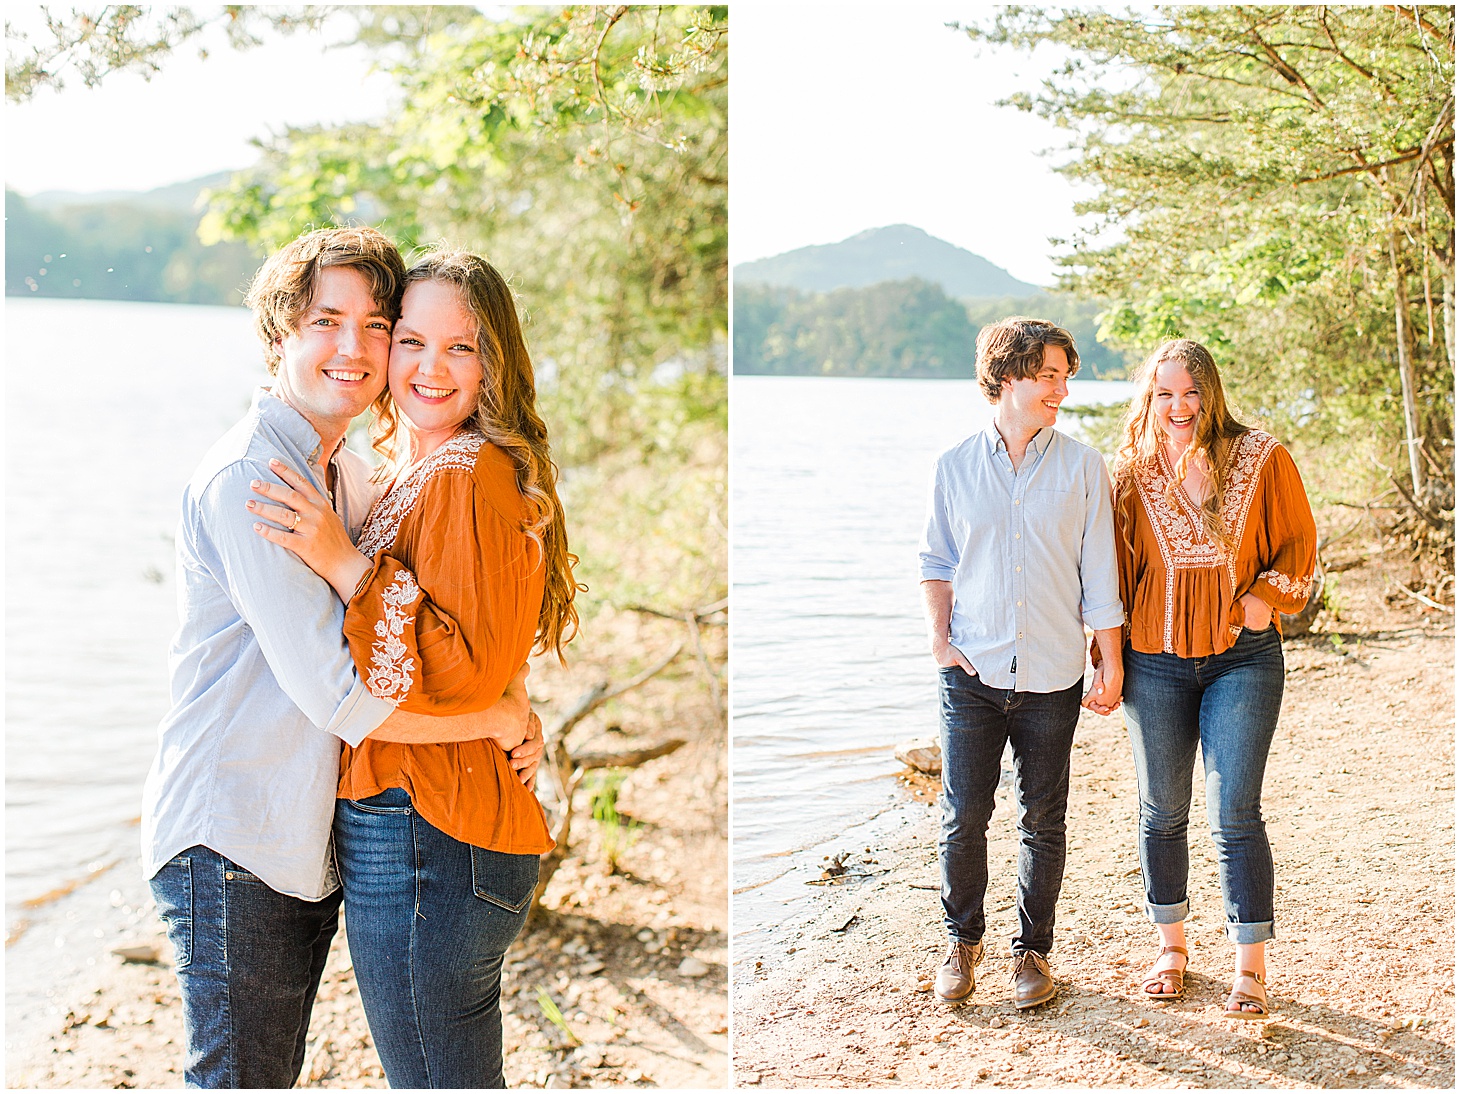 carvinscoveengagementsession_roanokeengagementsession_carvinscove_virginiawedding_virginiaweddingphotographer_vaweddingphotographer_photo_0009.jpg